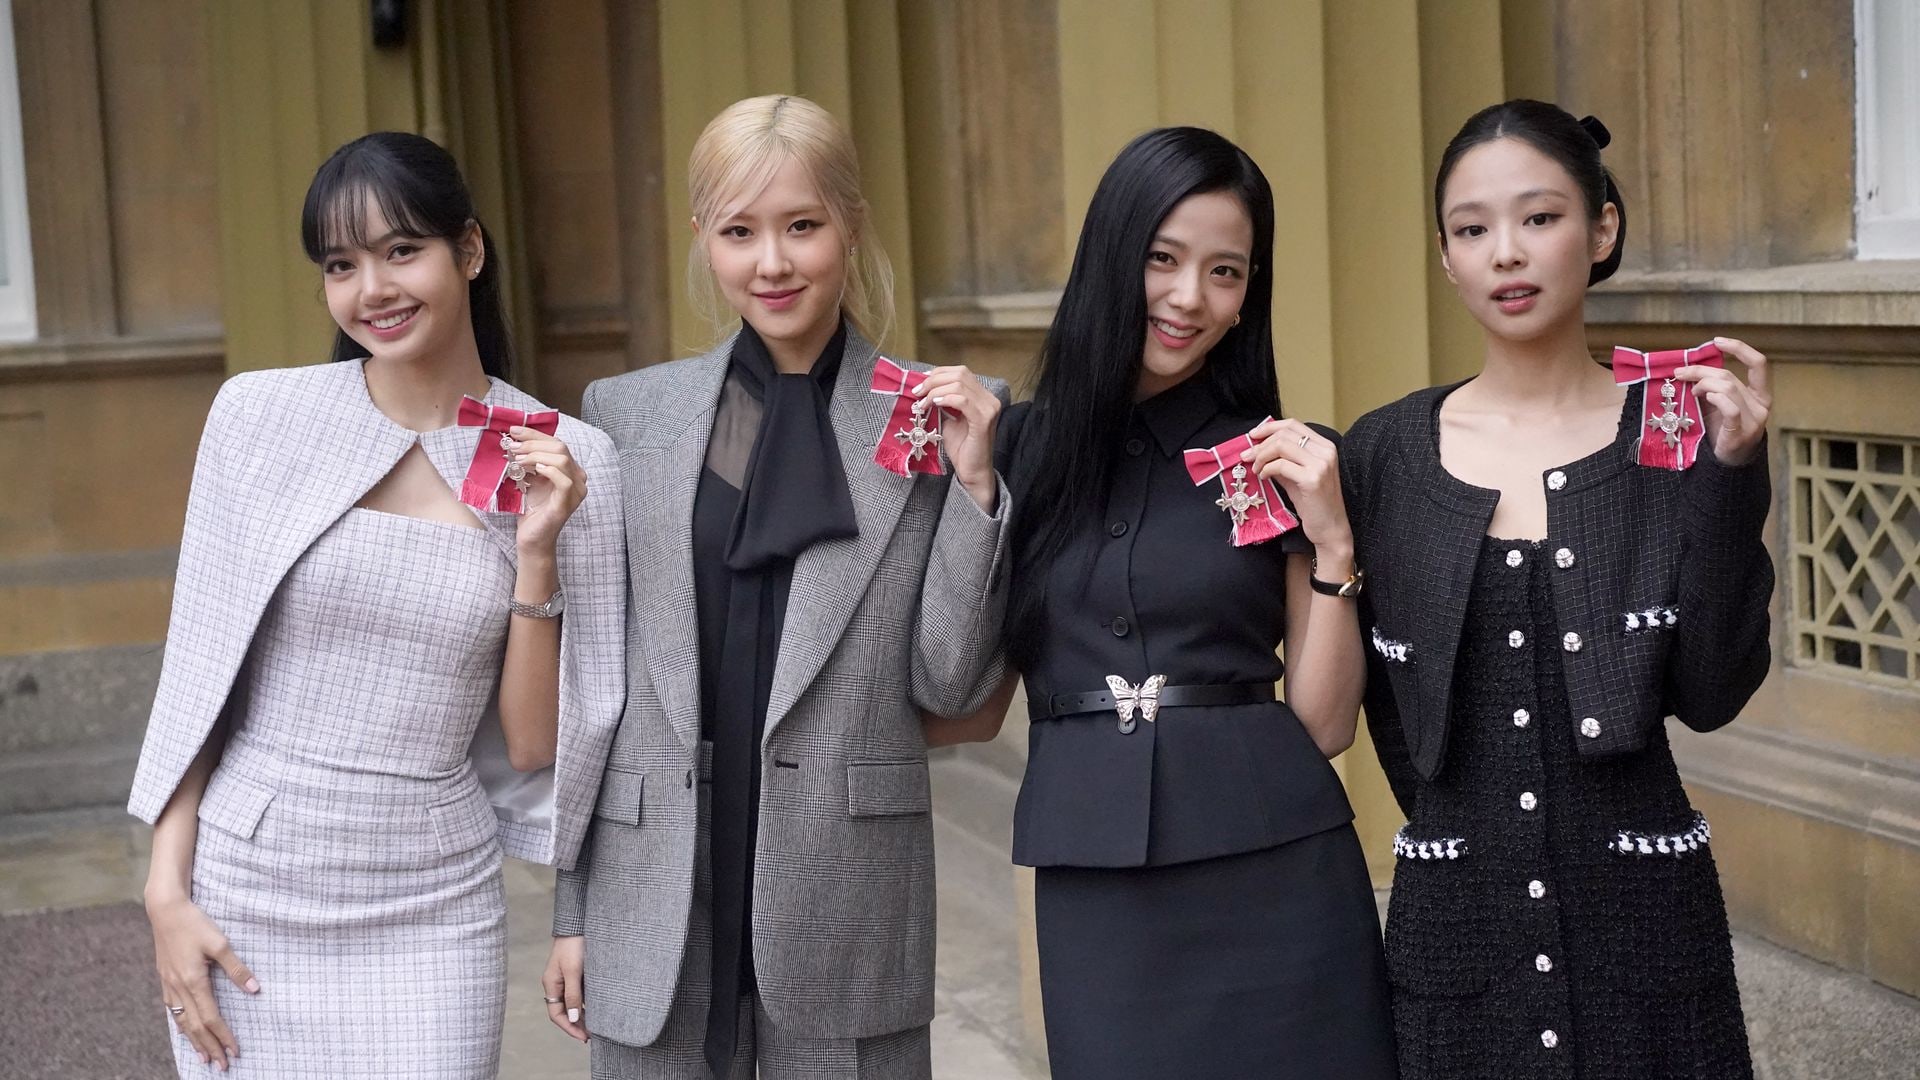 Lisa (Lalisa Manoban), Rose (Roseanne Park), Jisoo Kim and Jennie Kim, from the K-Pop band Blackpink pose with their Honorary MBEs 